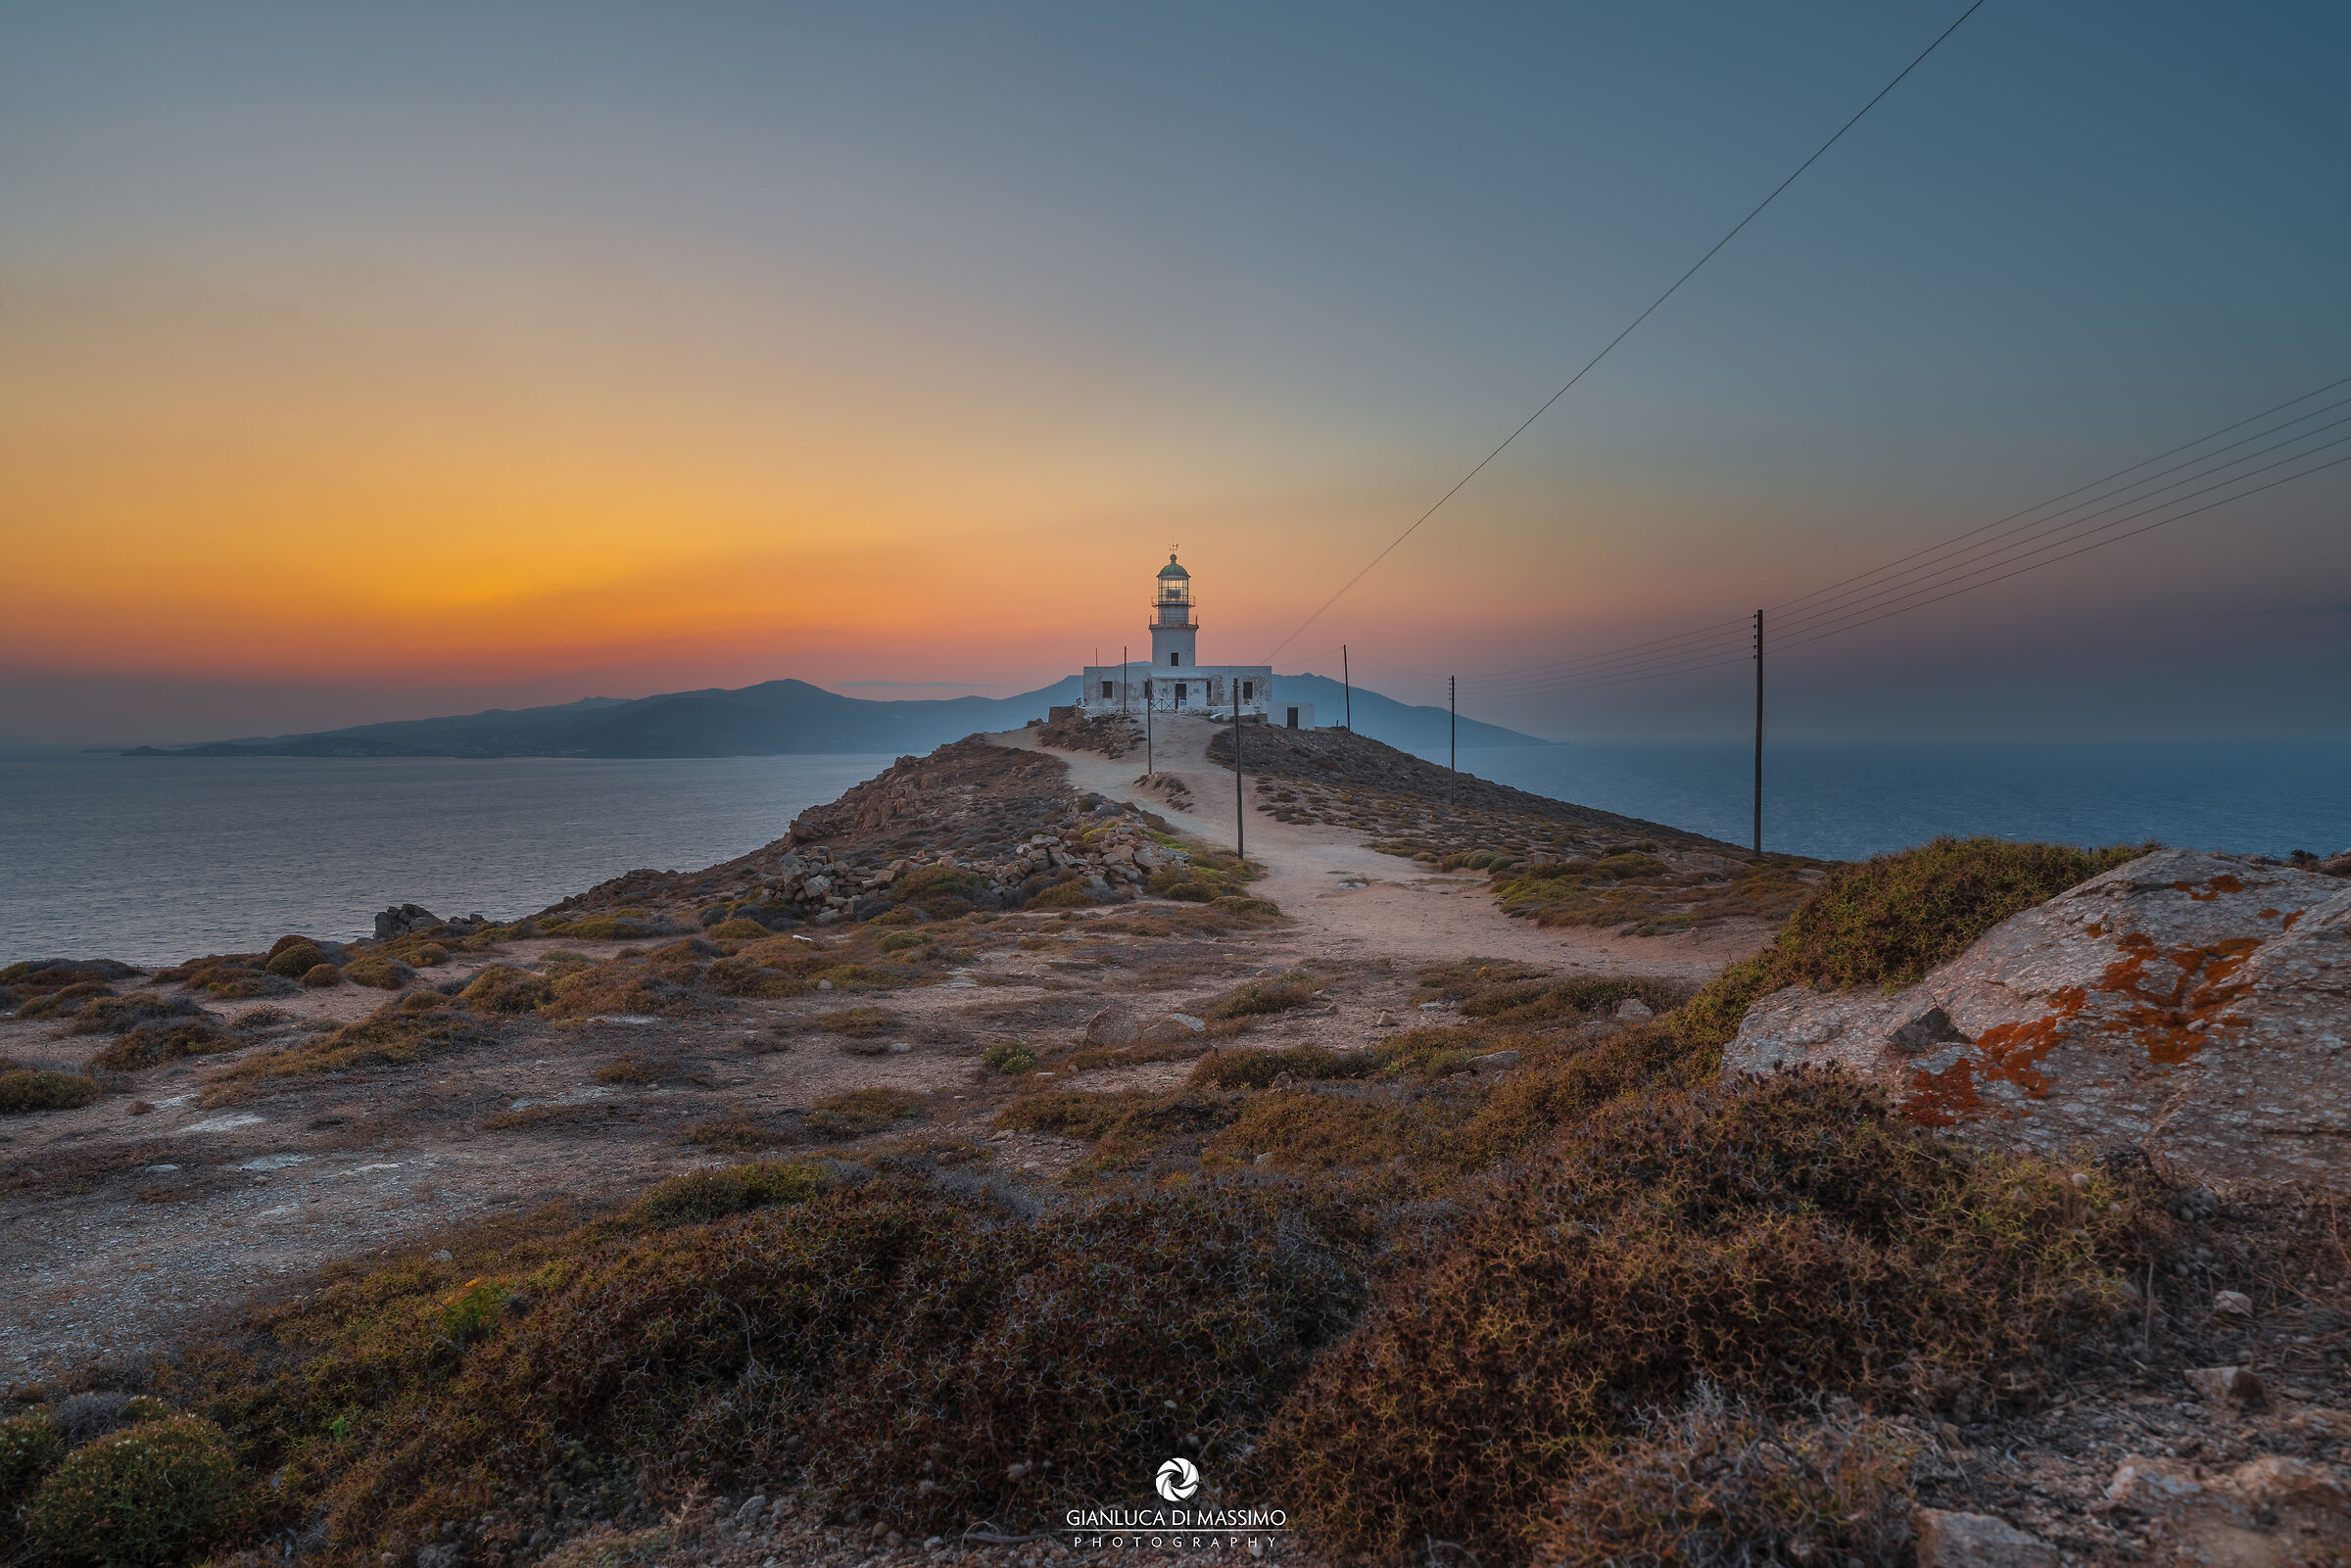 The Lighthouse OF Armenistis ...